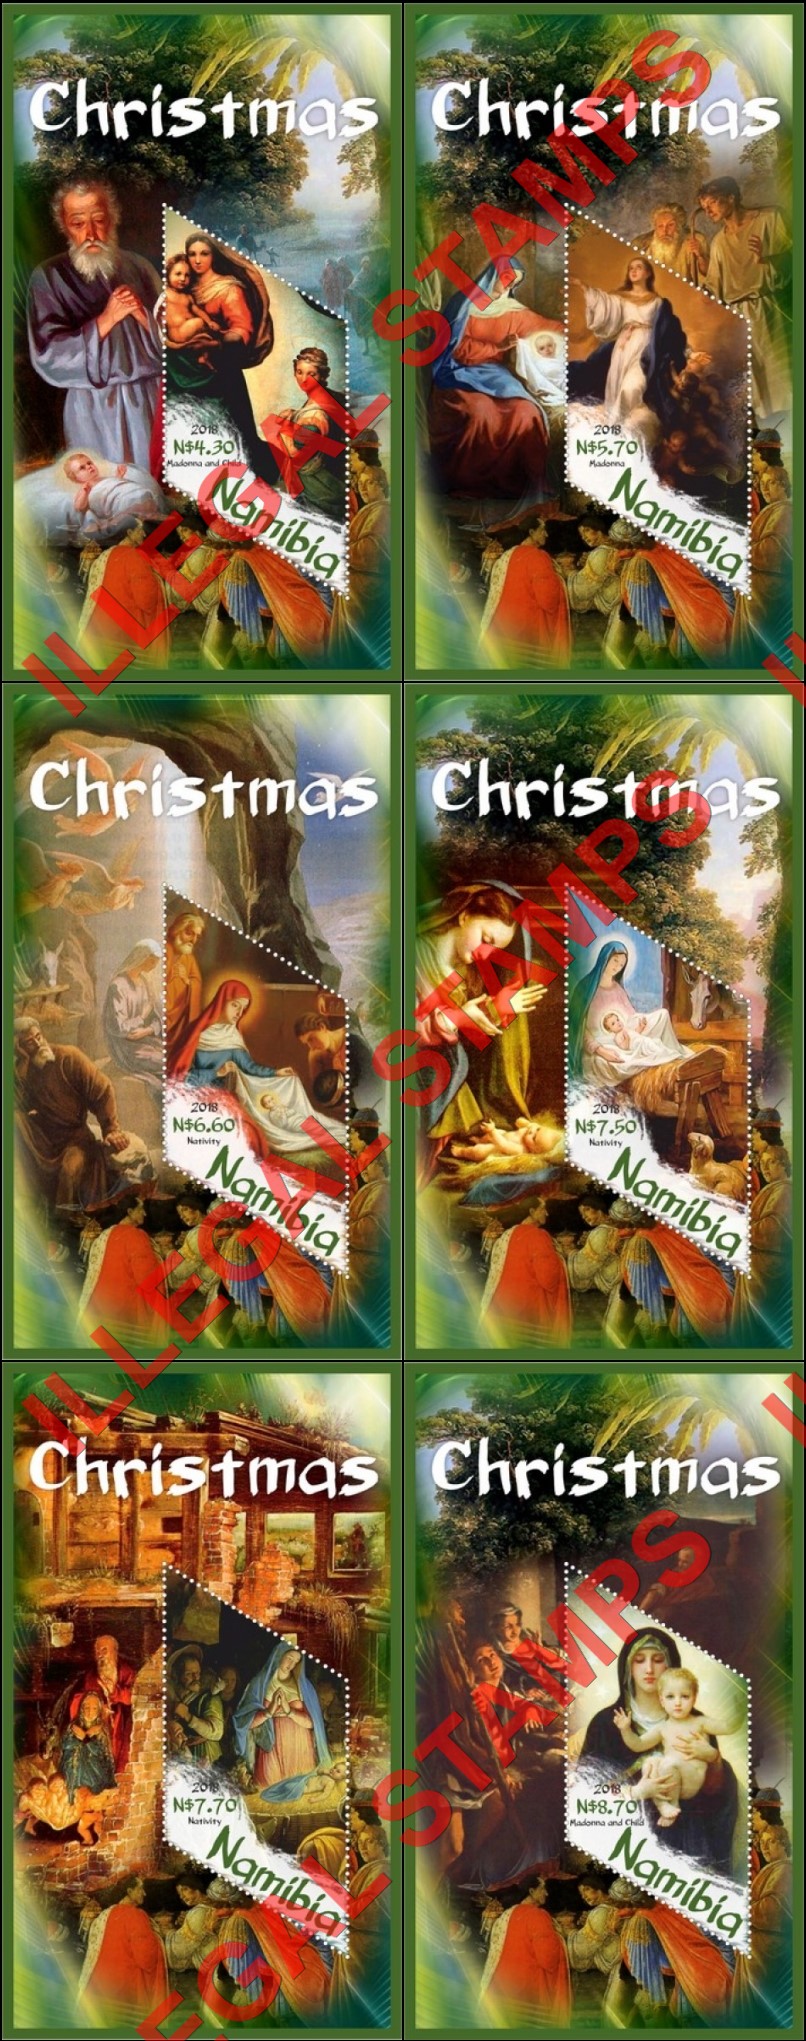 Namibia 2018 Christmas Paintings Illegal Stamp Souvenir Sheets of 1